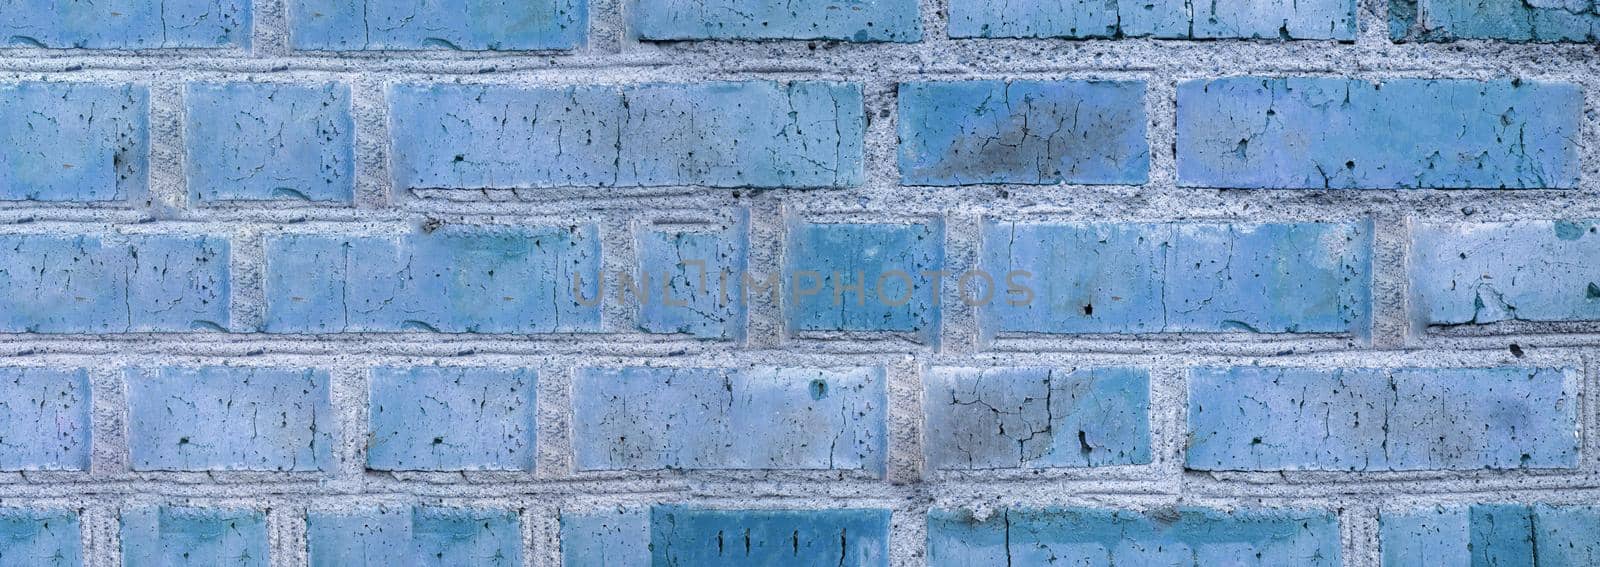 Banner background of an old brick wall, vintage brickwork texture, close-up, blue tinting.